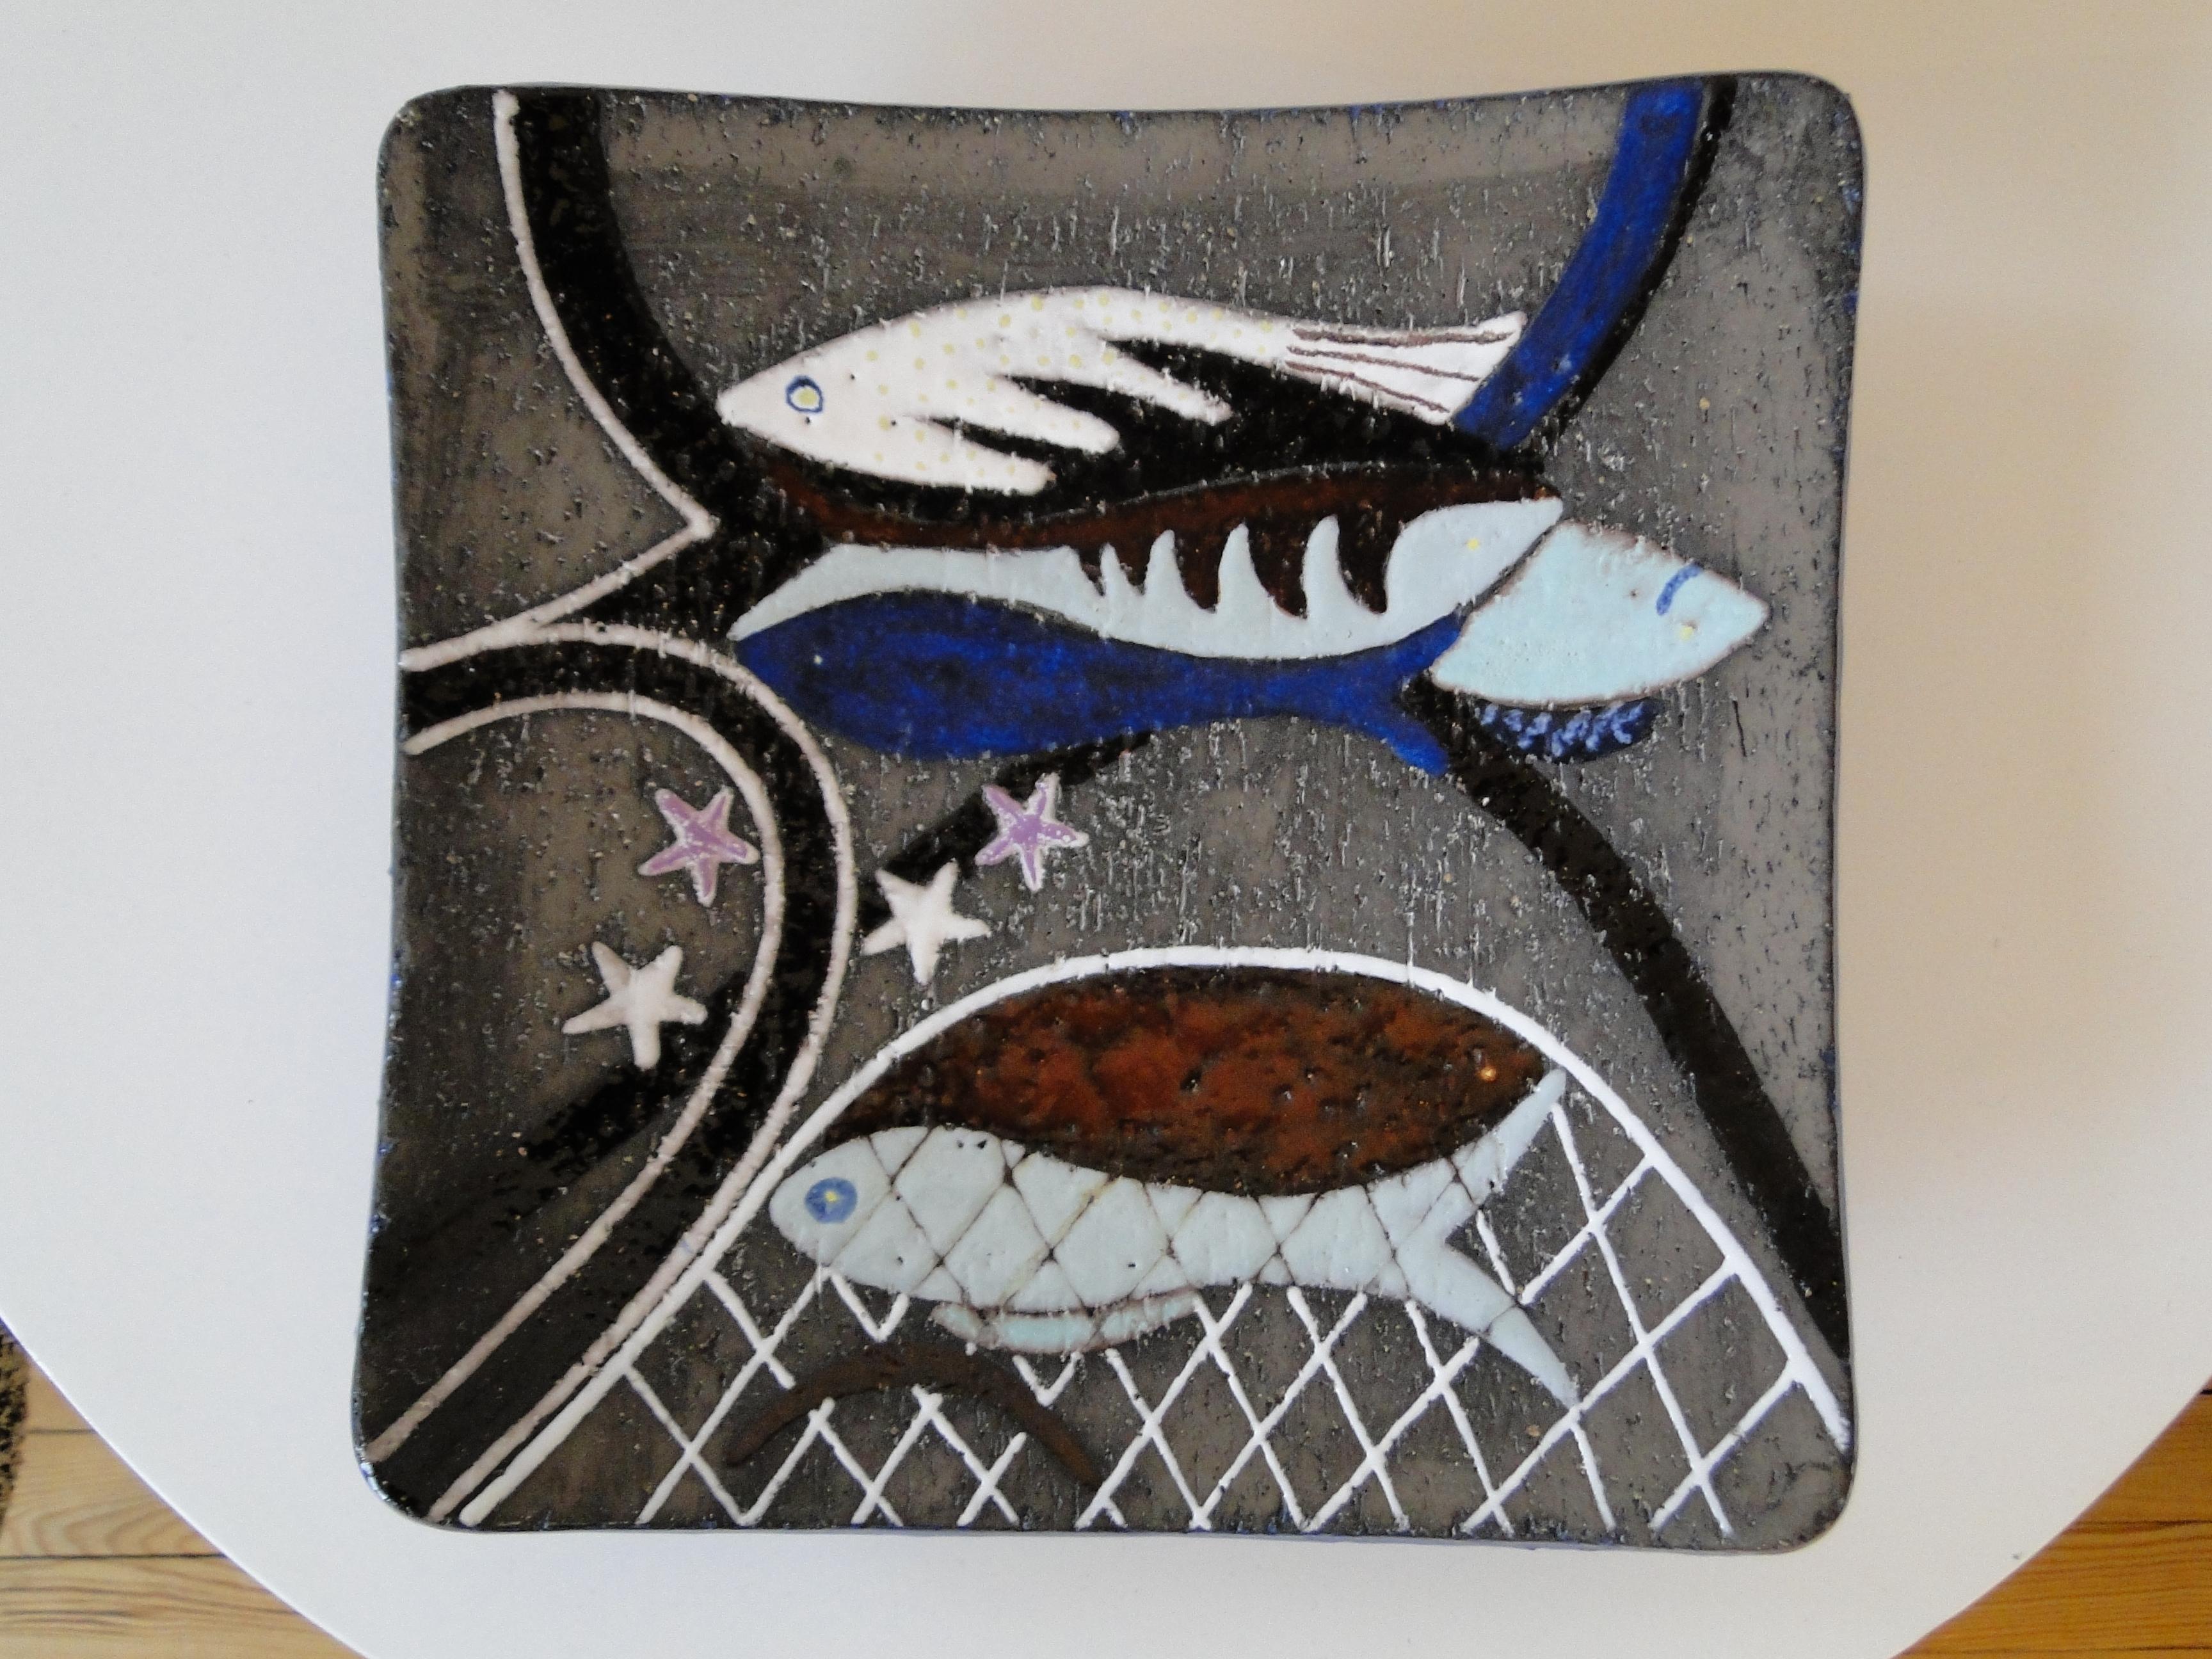 Magnificent dish by Anna-Lisa Thomson for Upsala Ekeby Sweden from the 1960s. 

The dish is in sandstone, the fish enamelled which gives a very nice contrast.

The overseas blue tone enhances this luminous dish that you can hang on the wall or